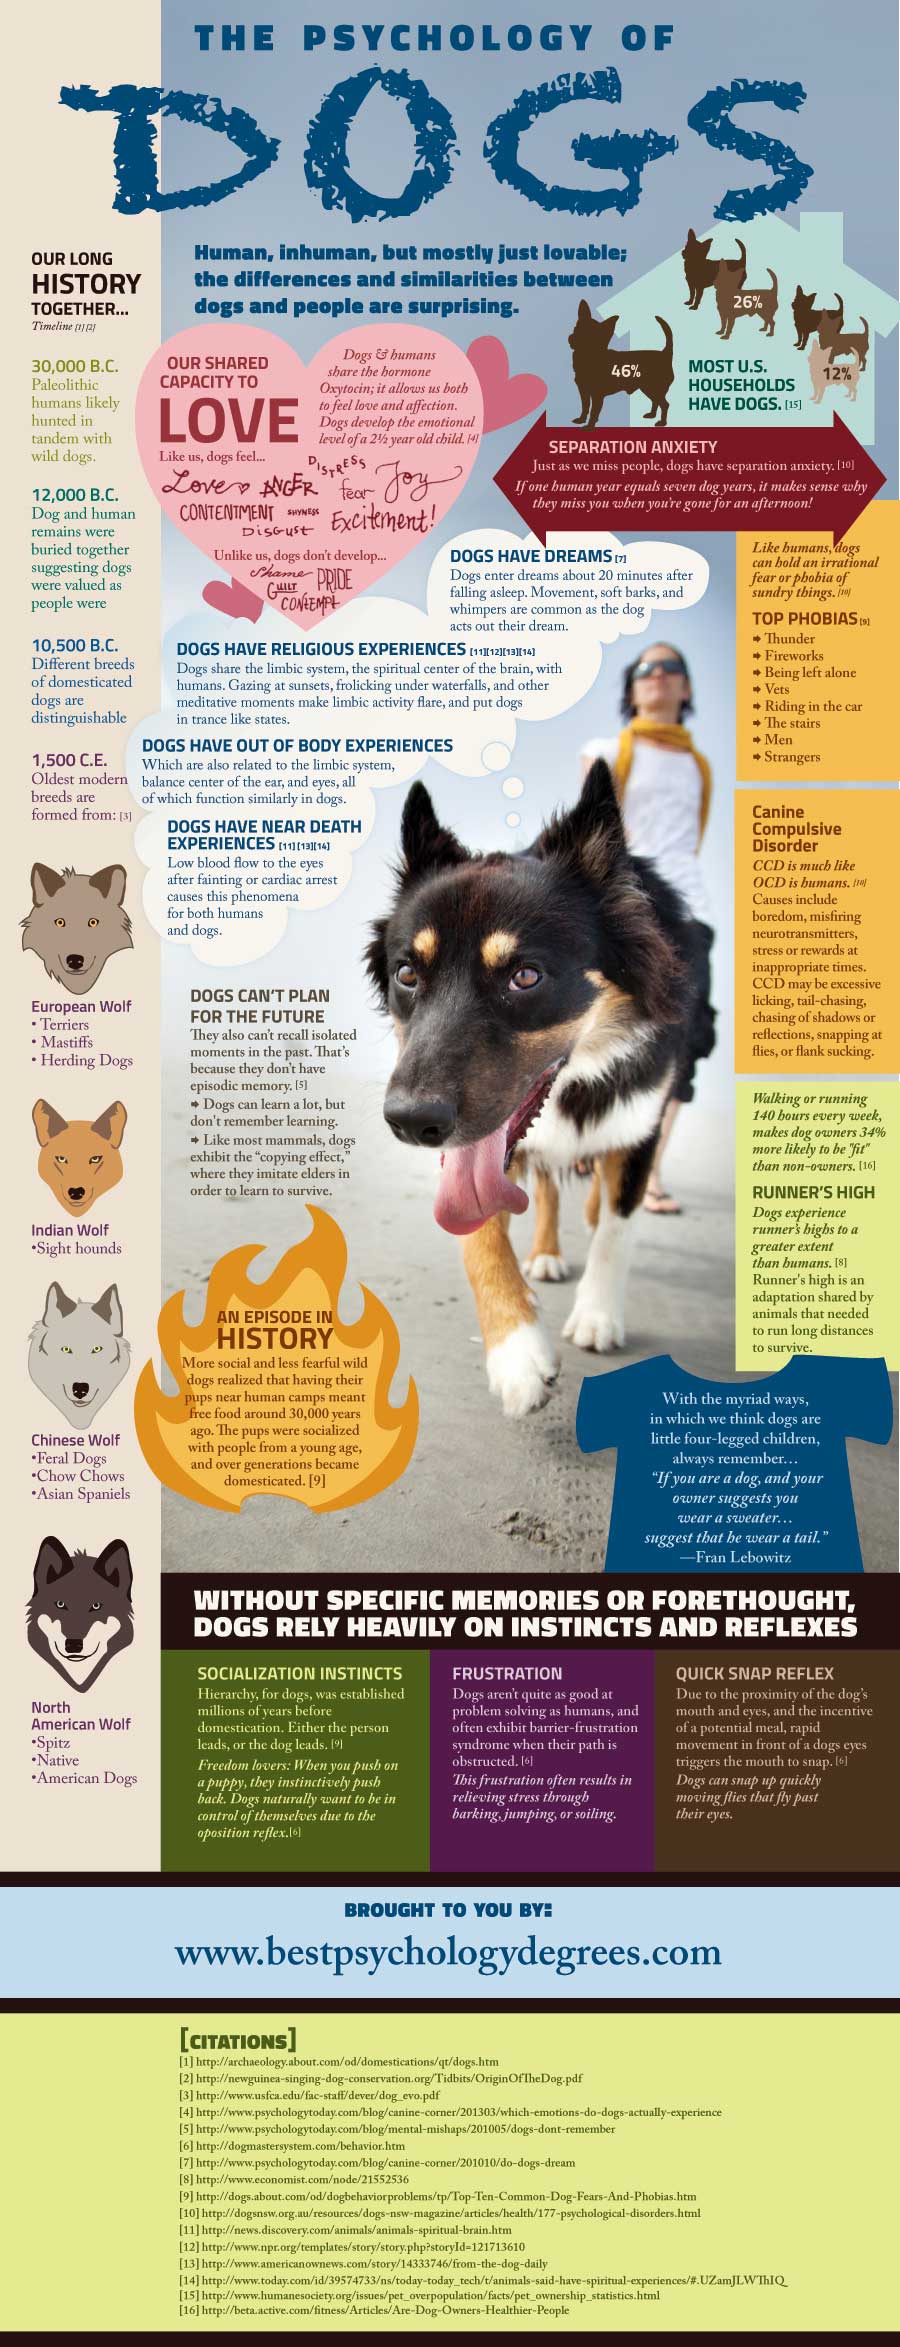 The Psychology of Dogs